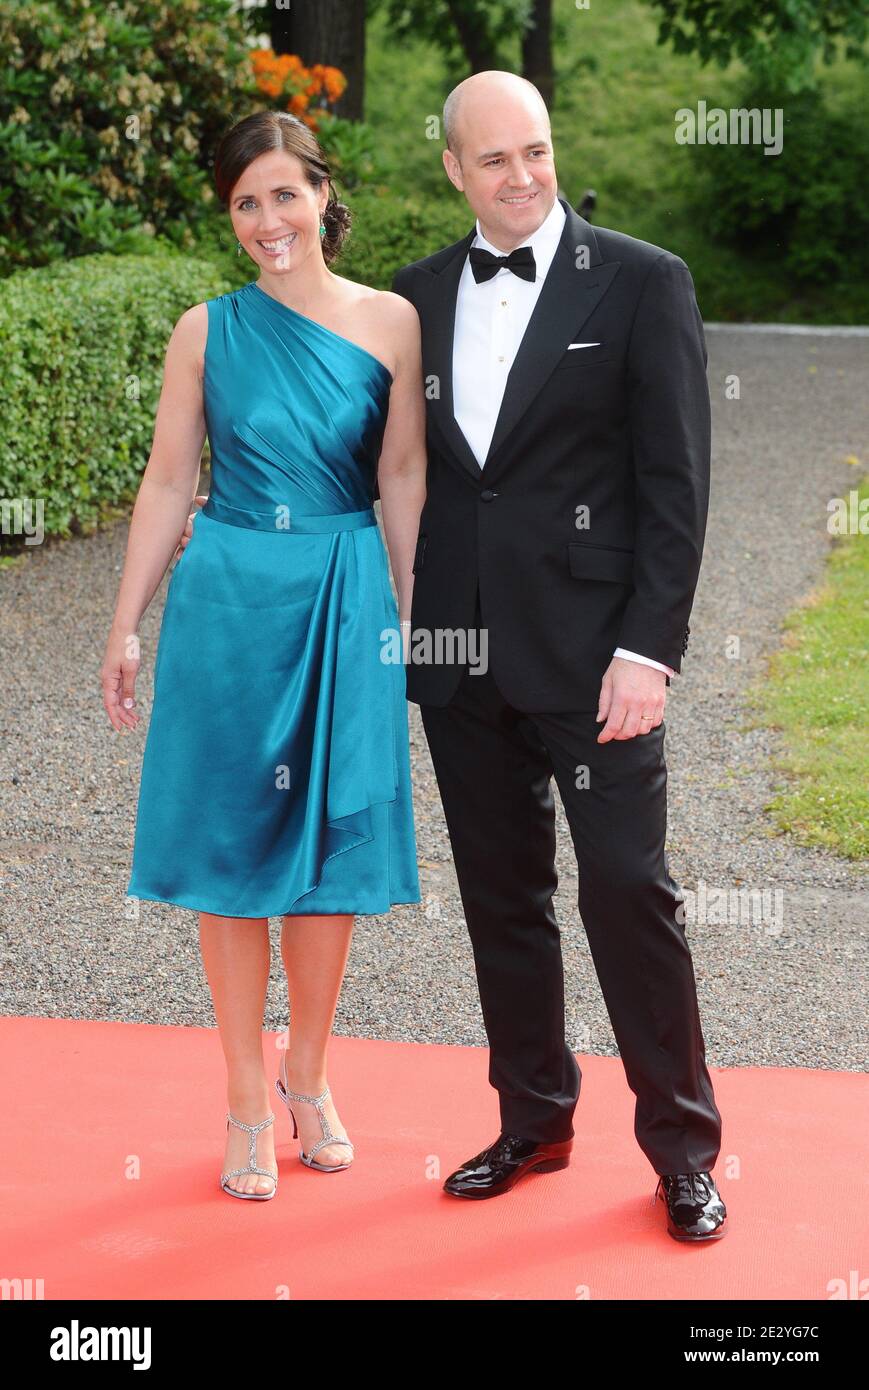 PM Fredrik Reinfeldt with wife Filippa arriving at the Swedish government dinner in honour of H.R.H. Crown Princess Victoria and Mr Daniel Westling held at the Eric Ericson hall in Stockholm, Sweden on June 18, 2010. Photo by Mousse-Nebinger-Orban/ABACAPRESS.COM Stock Photo